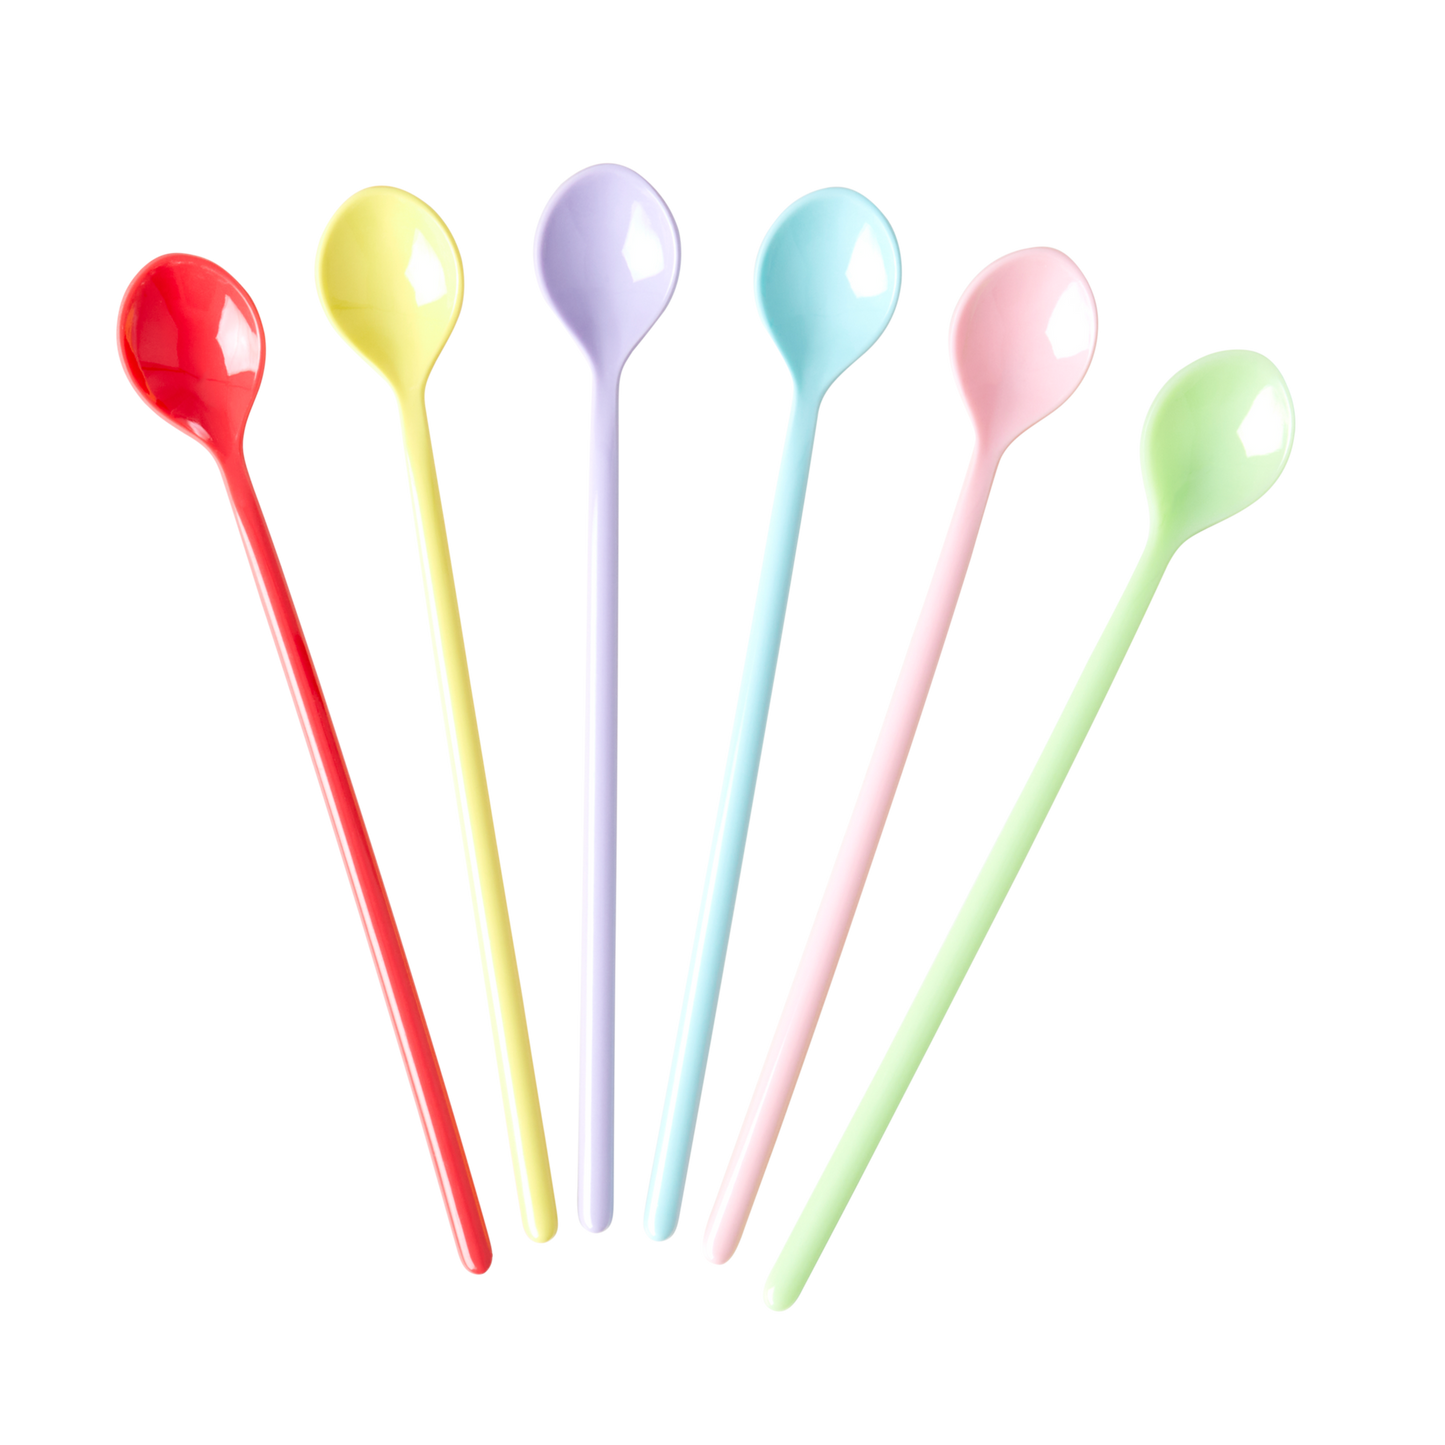 Rice DK 6 Melamine Long Spoons 'Yippie Yippie Yeah' Colors